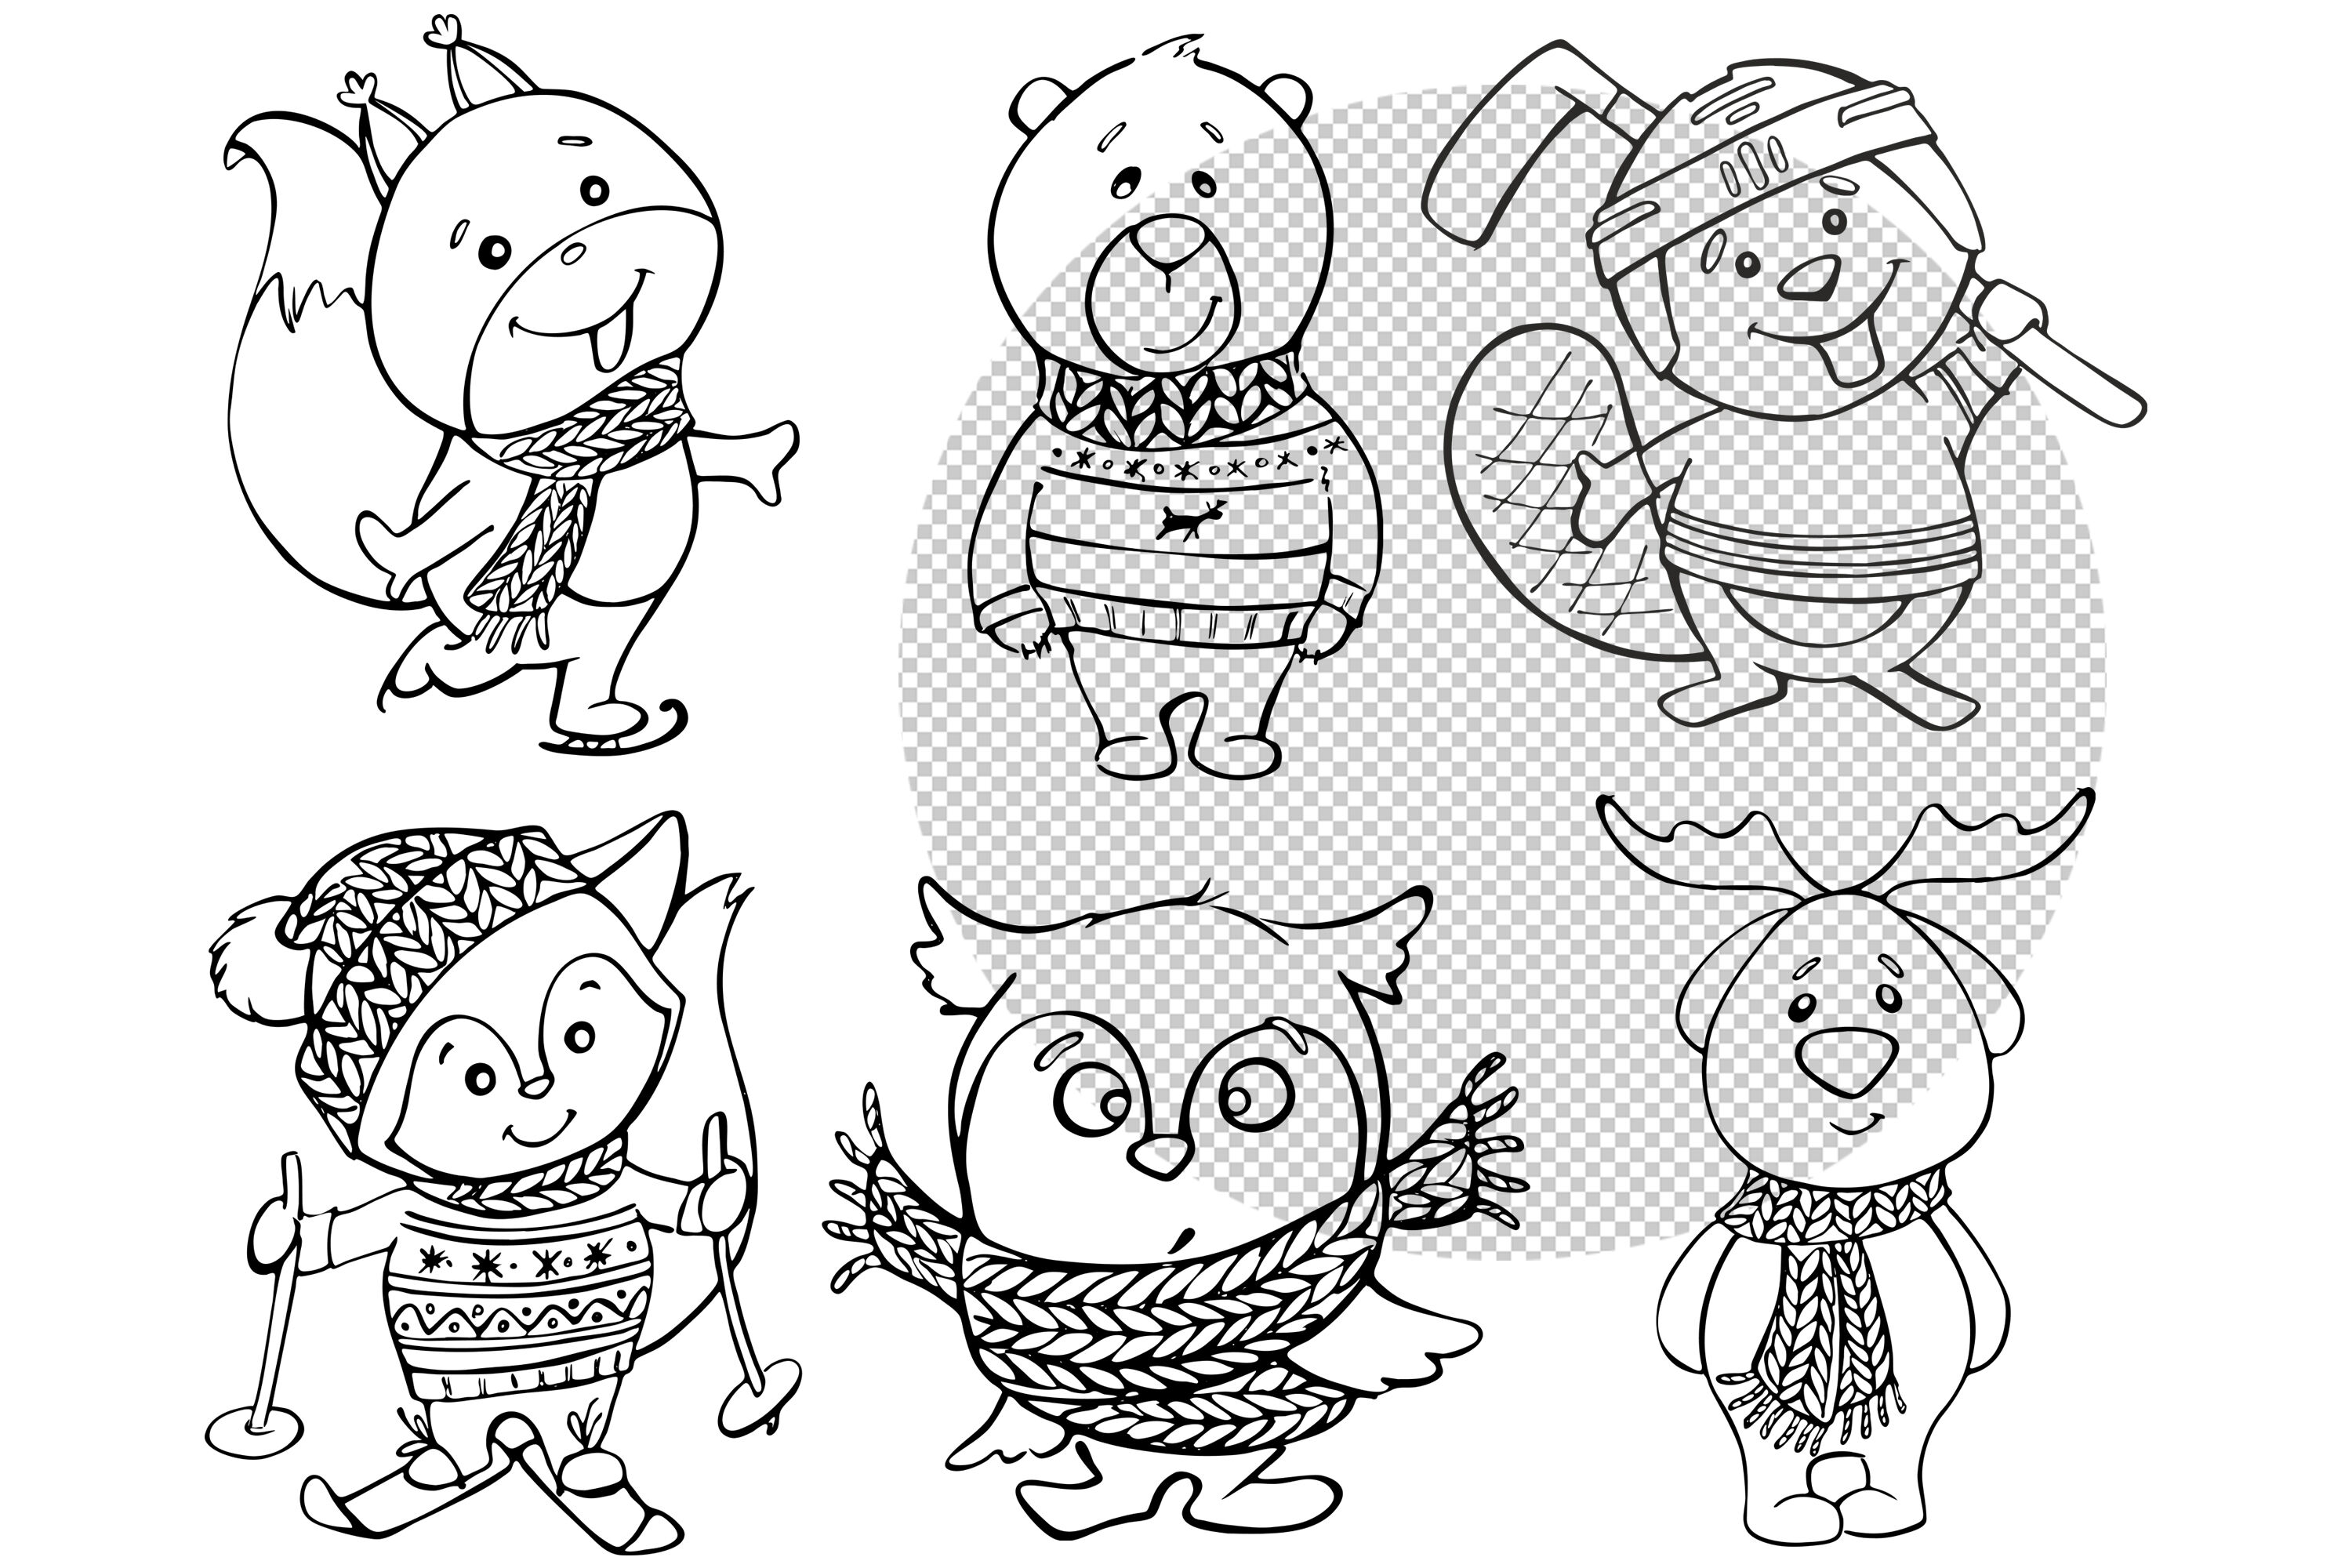 cute winter animals clipart black and white